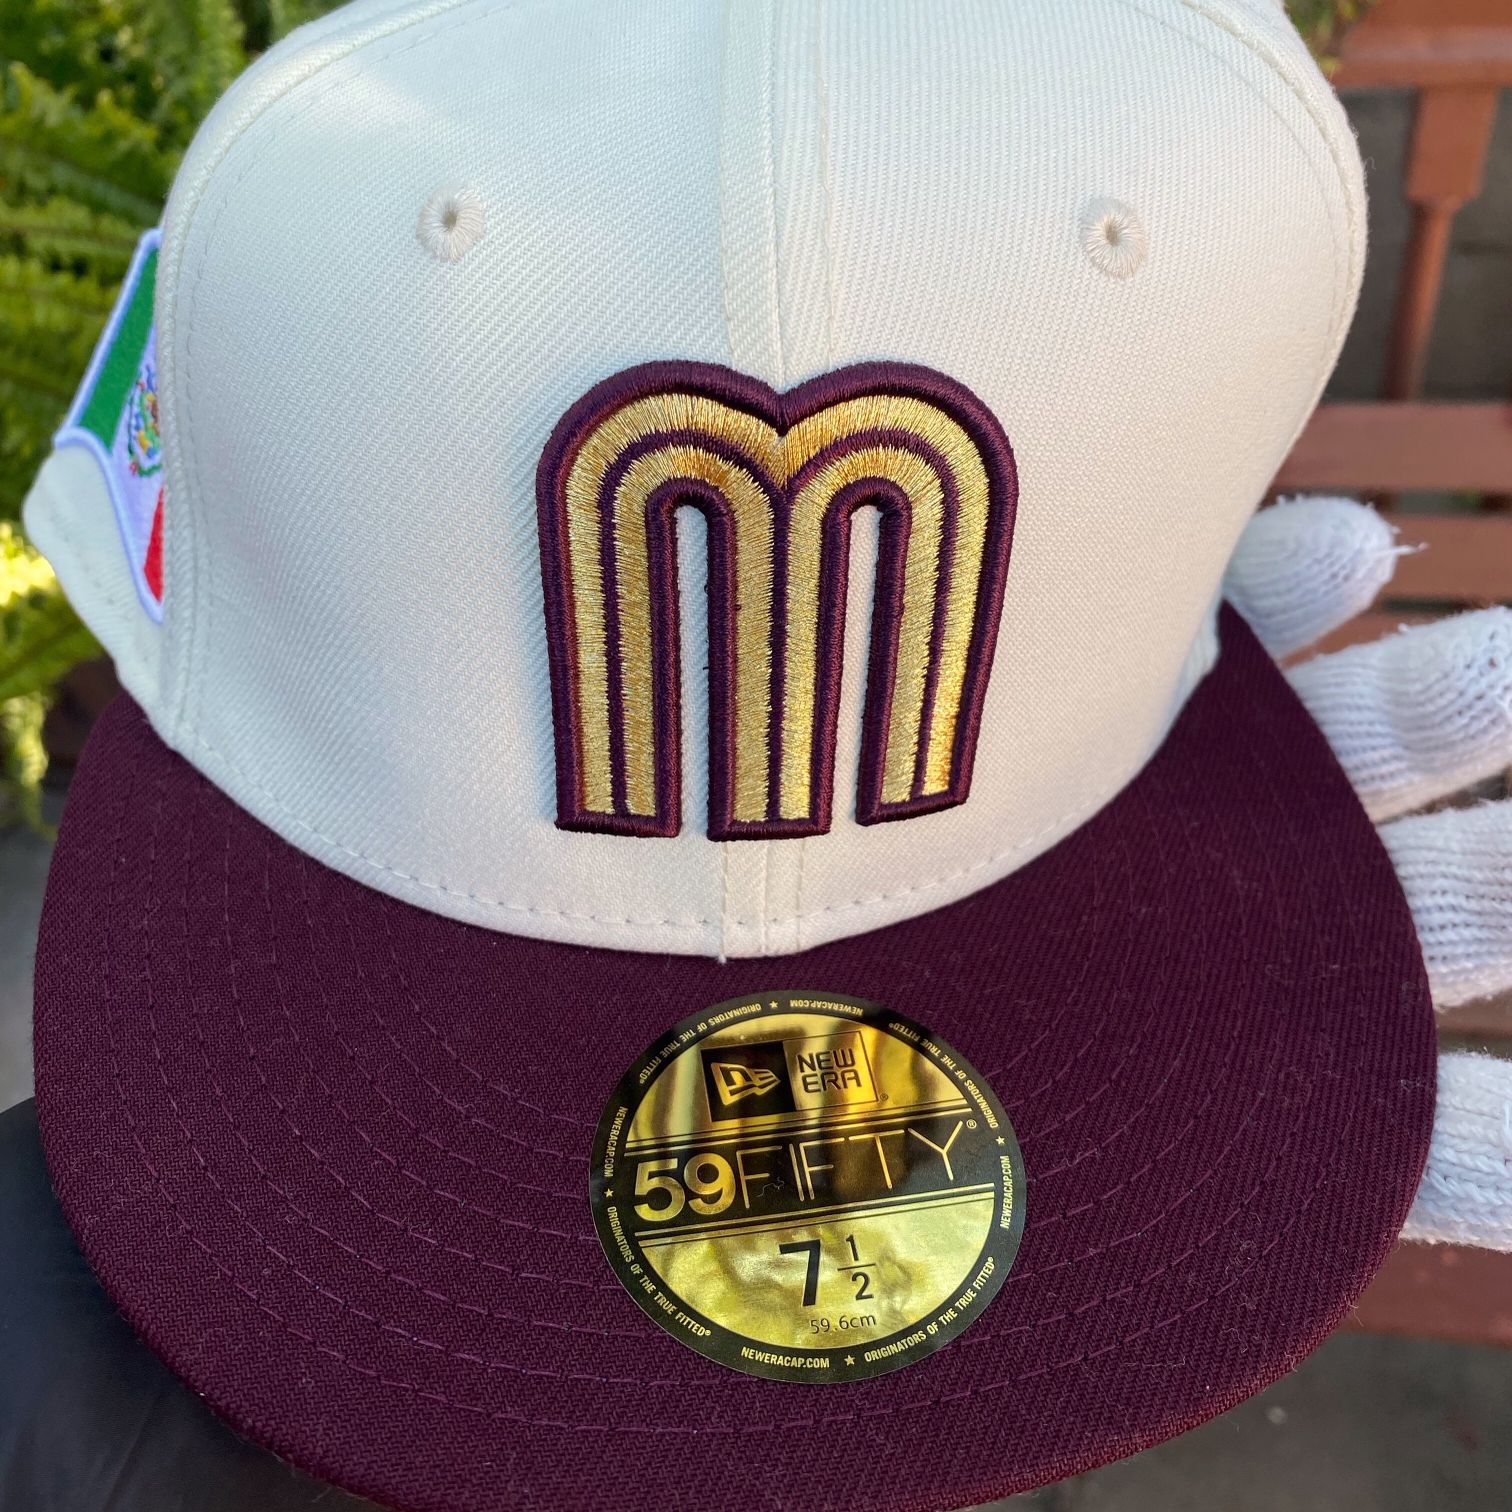 new era washington nationals hat for Sale in Calistoga, CA - OfferUp